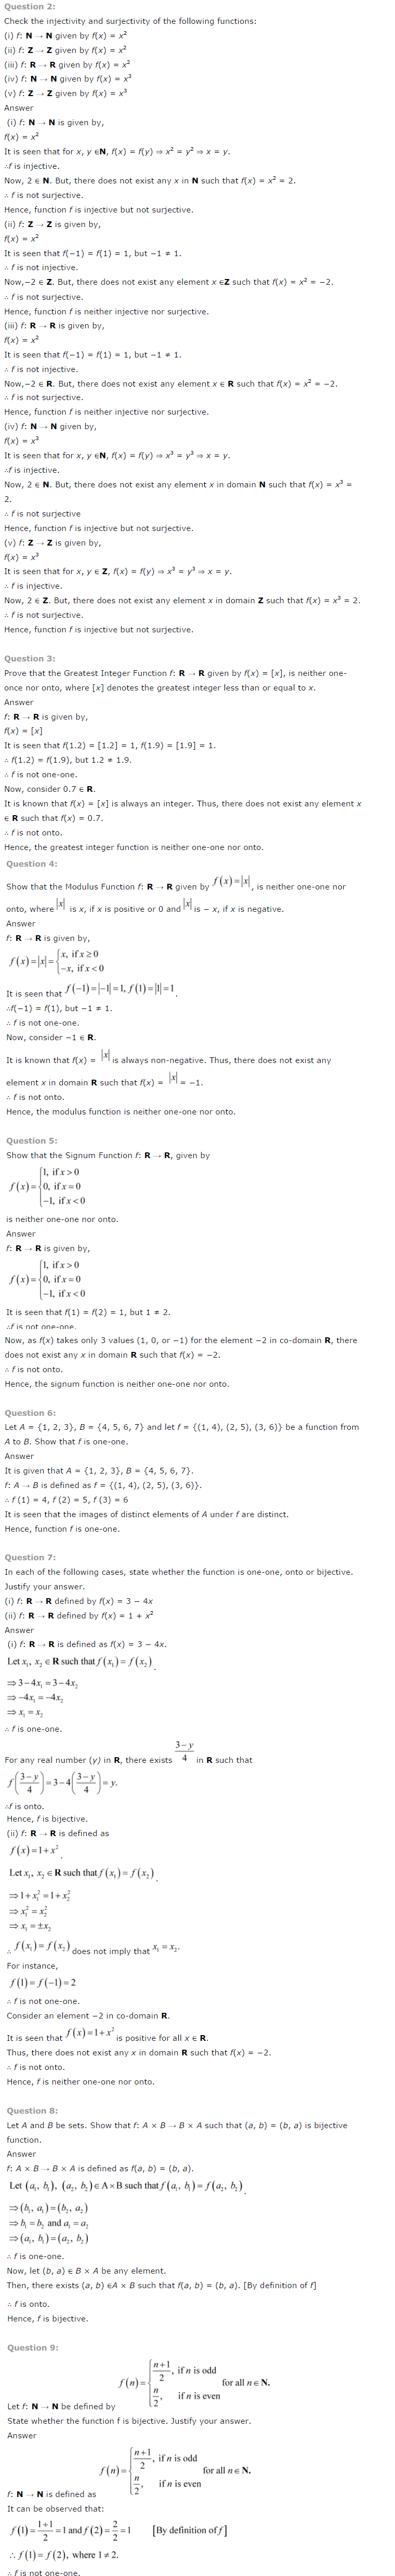 NCERT Solutions For Class 12 Maths Chapter 1 Relations and Functions 4